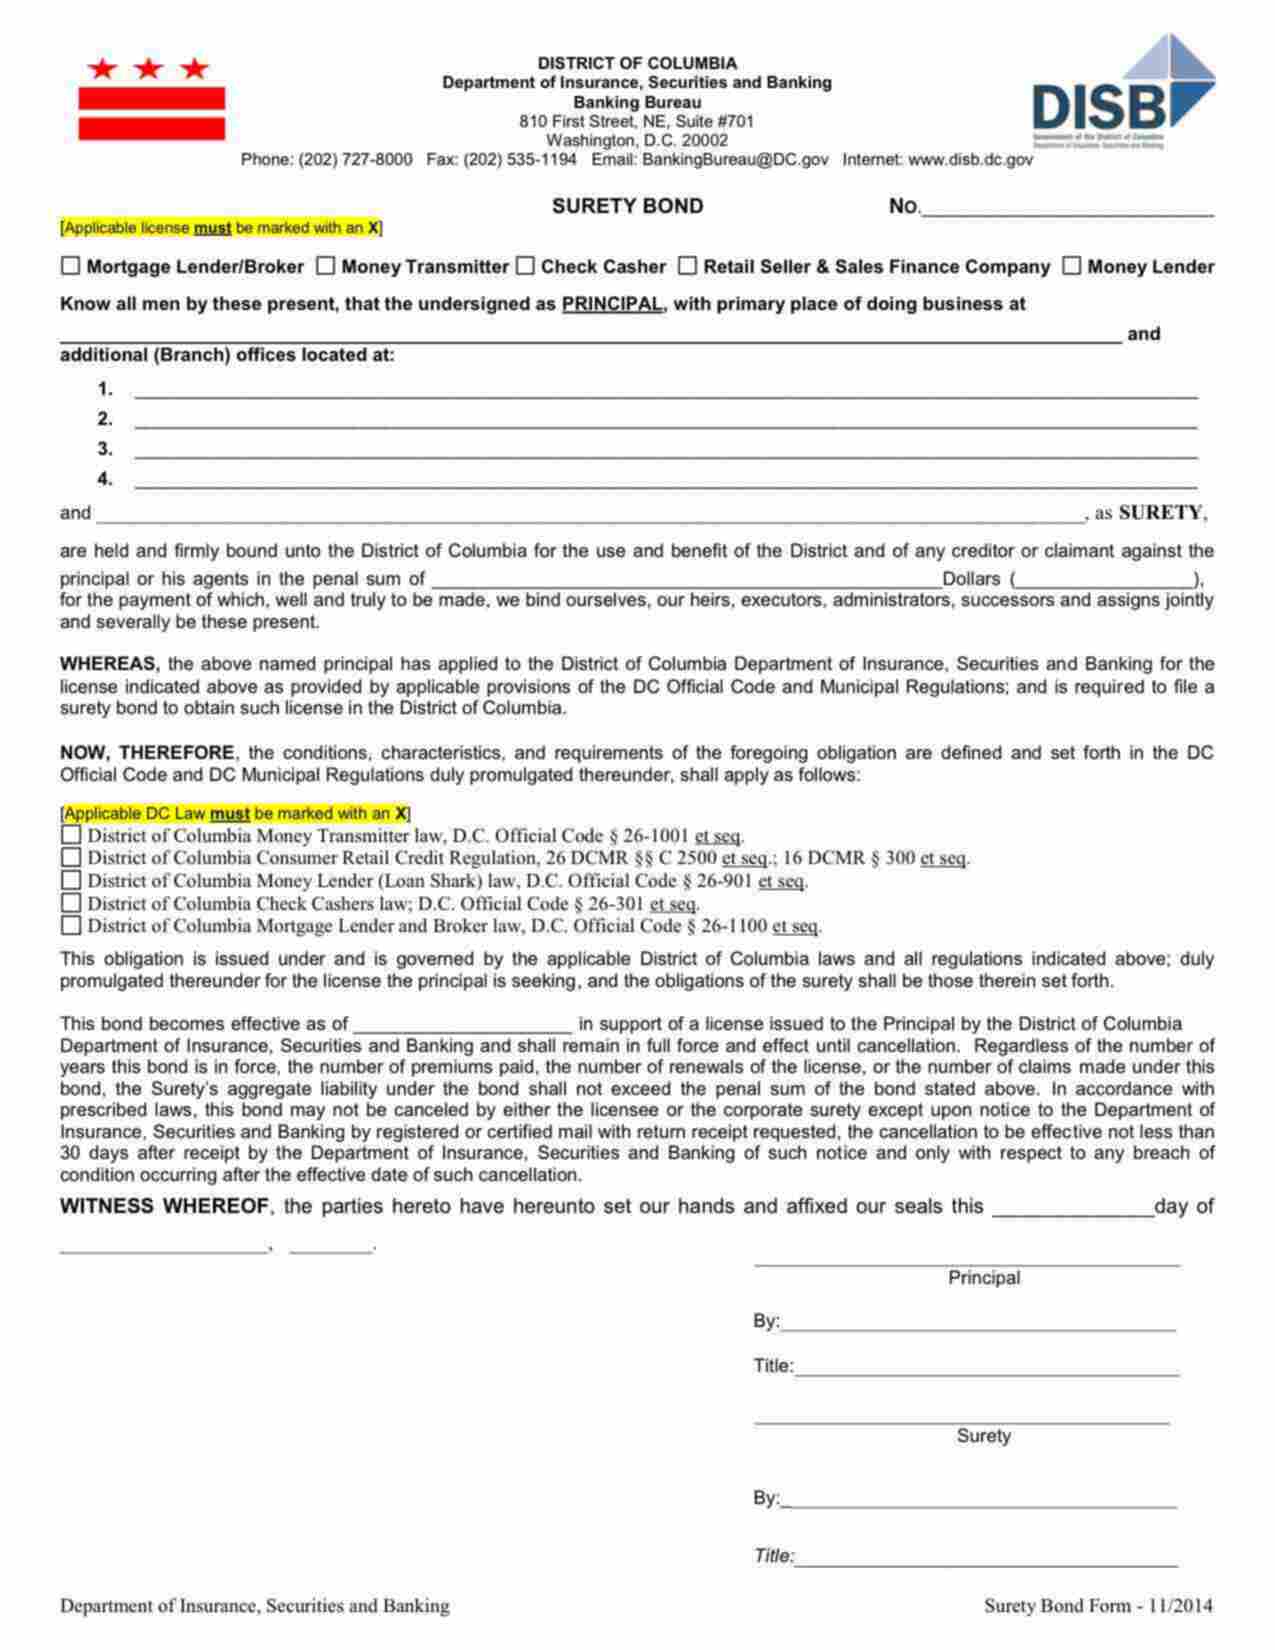 District of Columbia Retail Seller & Sales Finance Company Bond Form